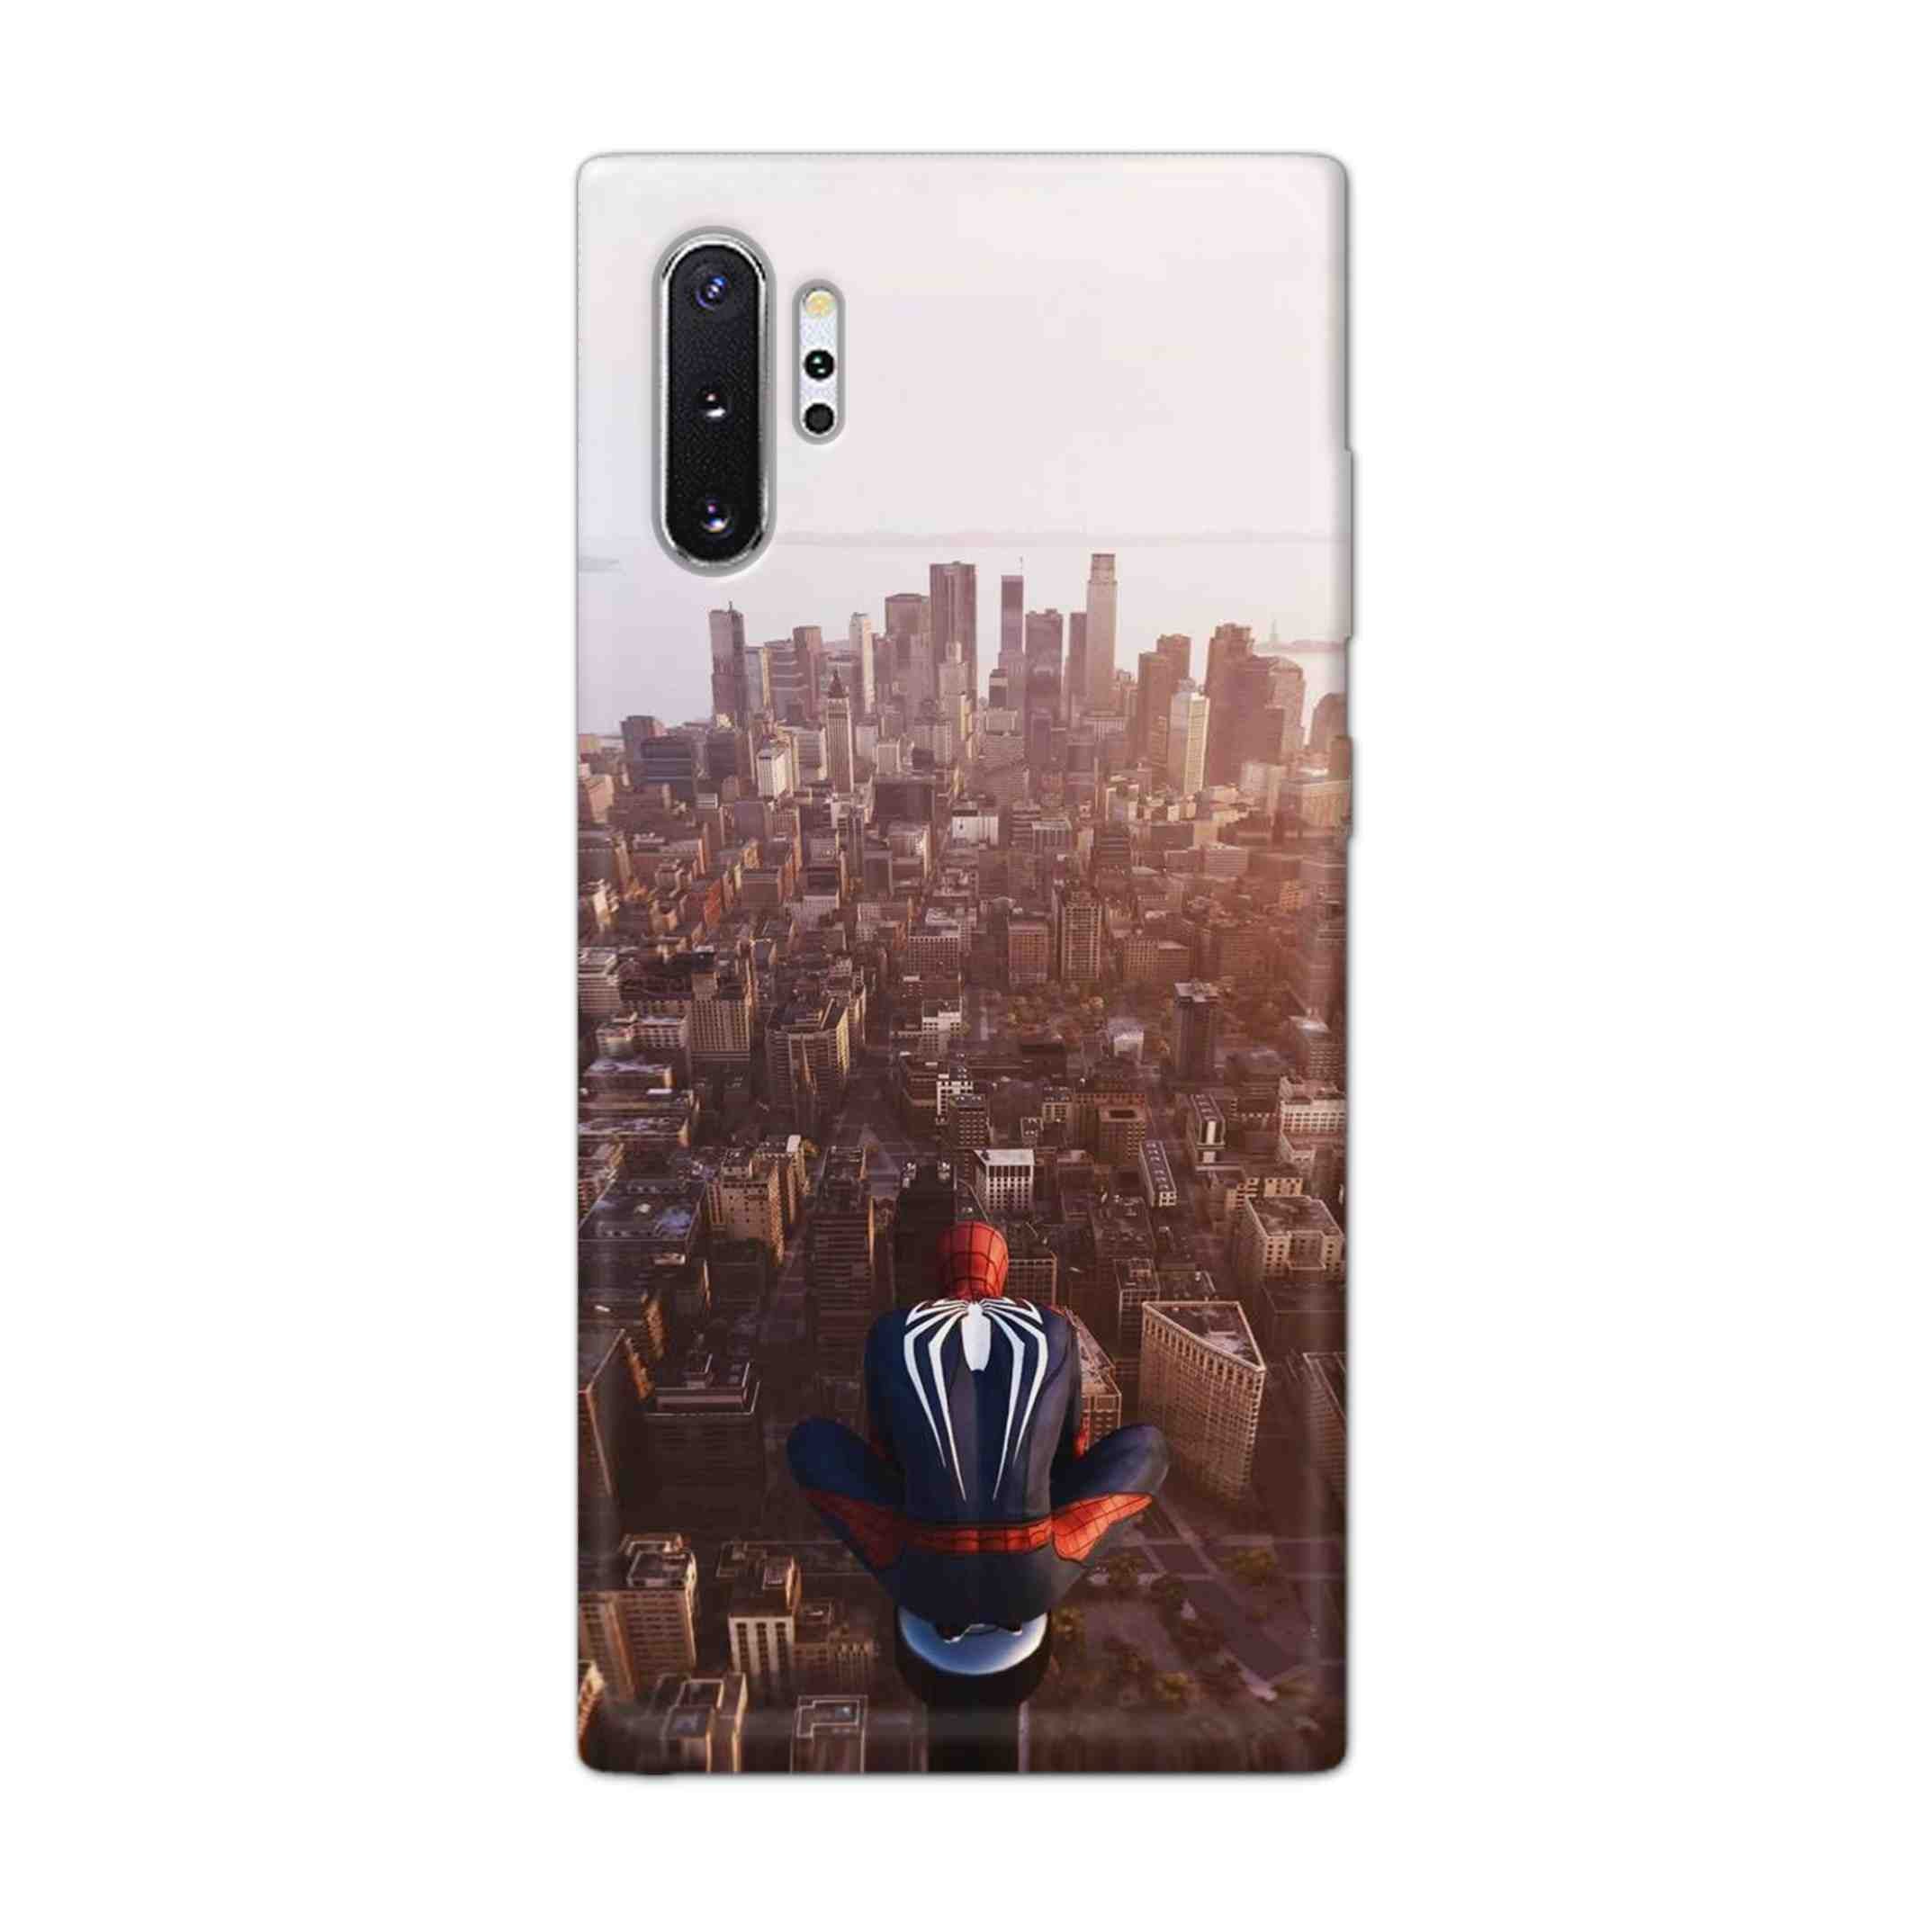 Buy City Of Spiderman Hard Back Mobile Phone Case Cover For Samsung Note 10 Plus (5G) Online